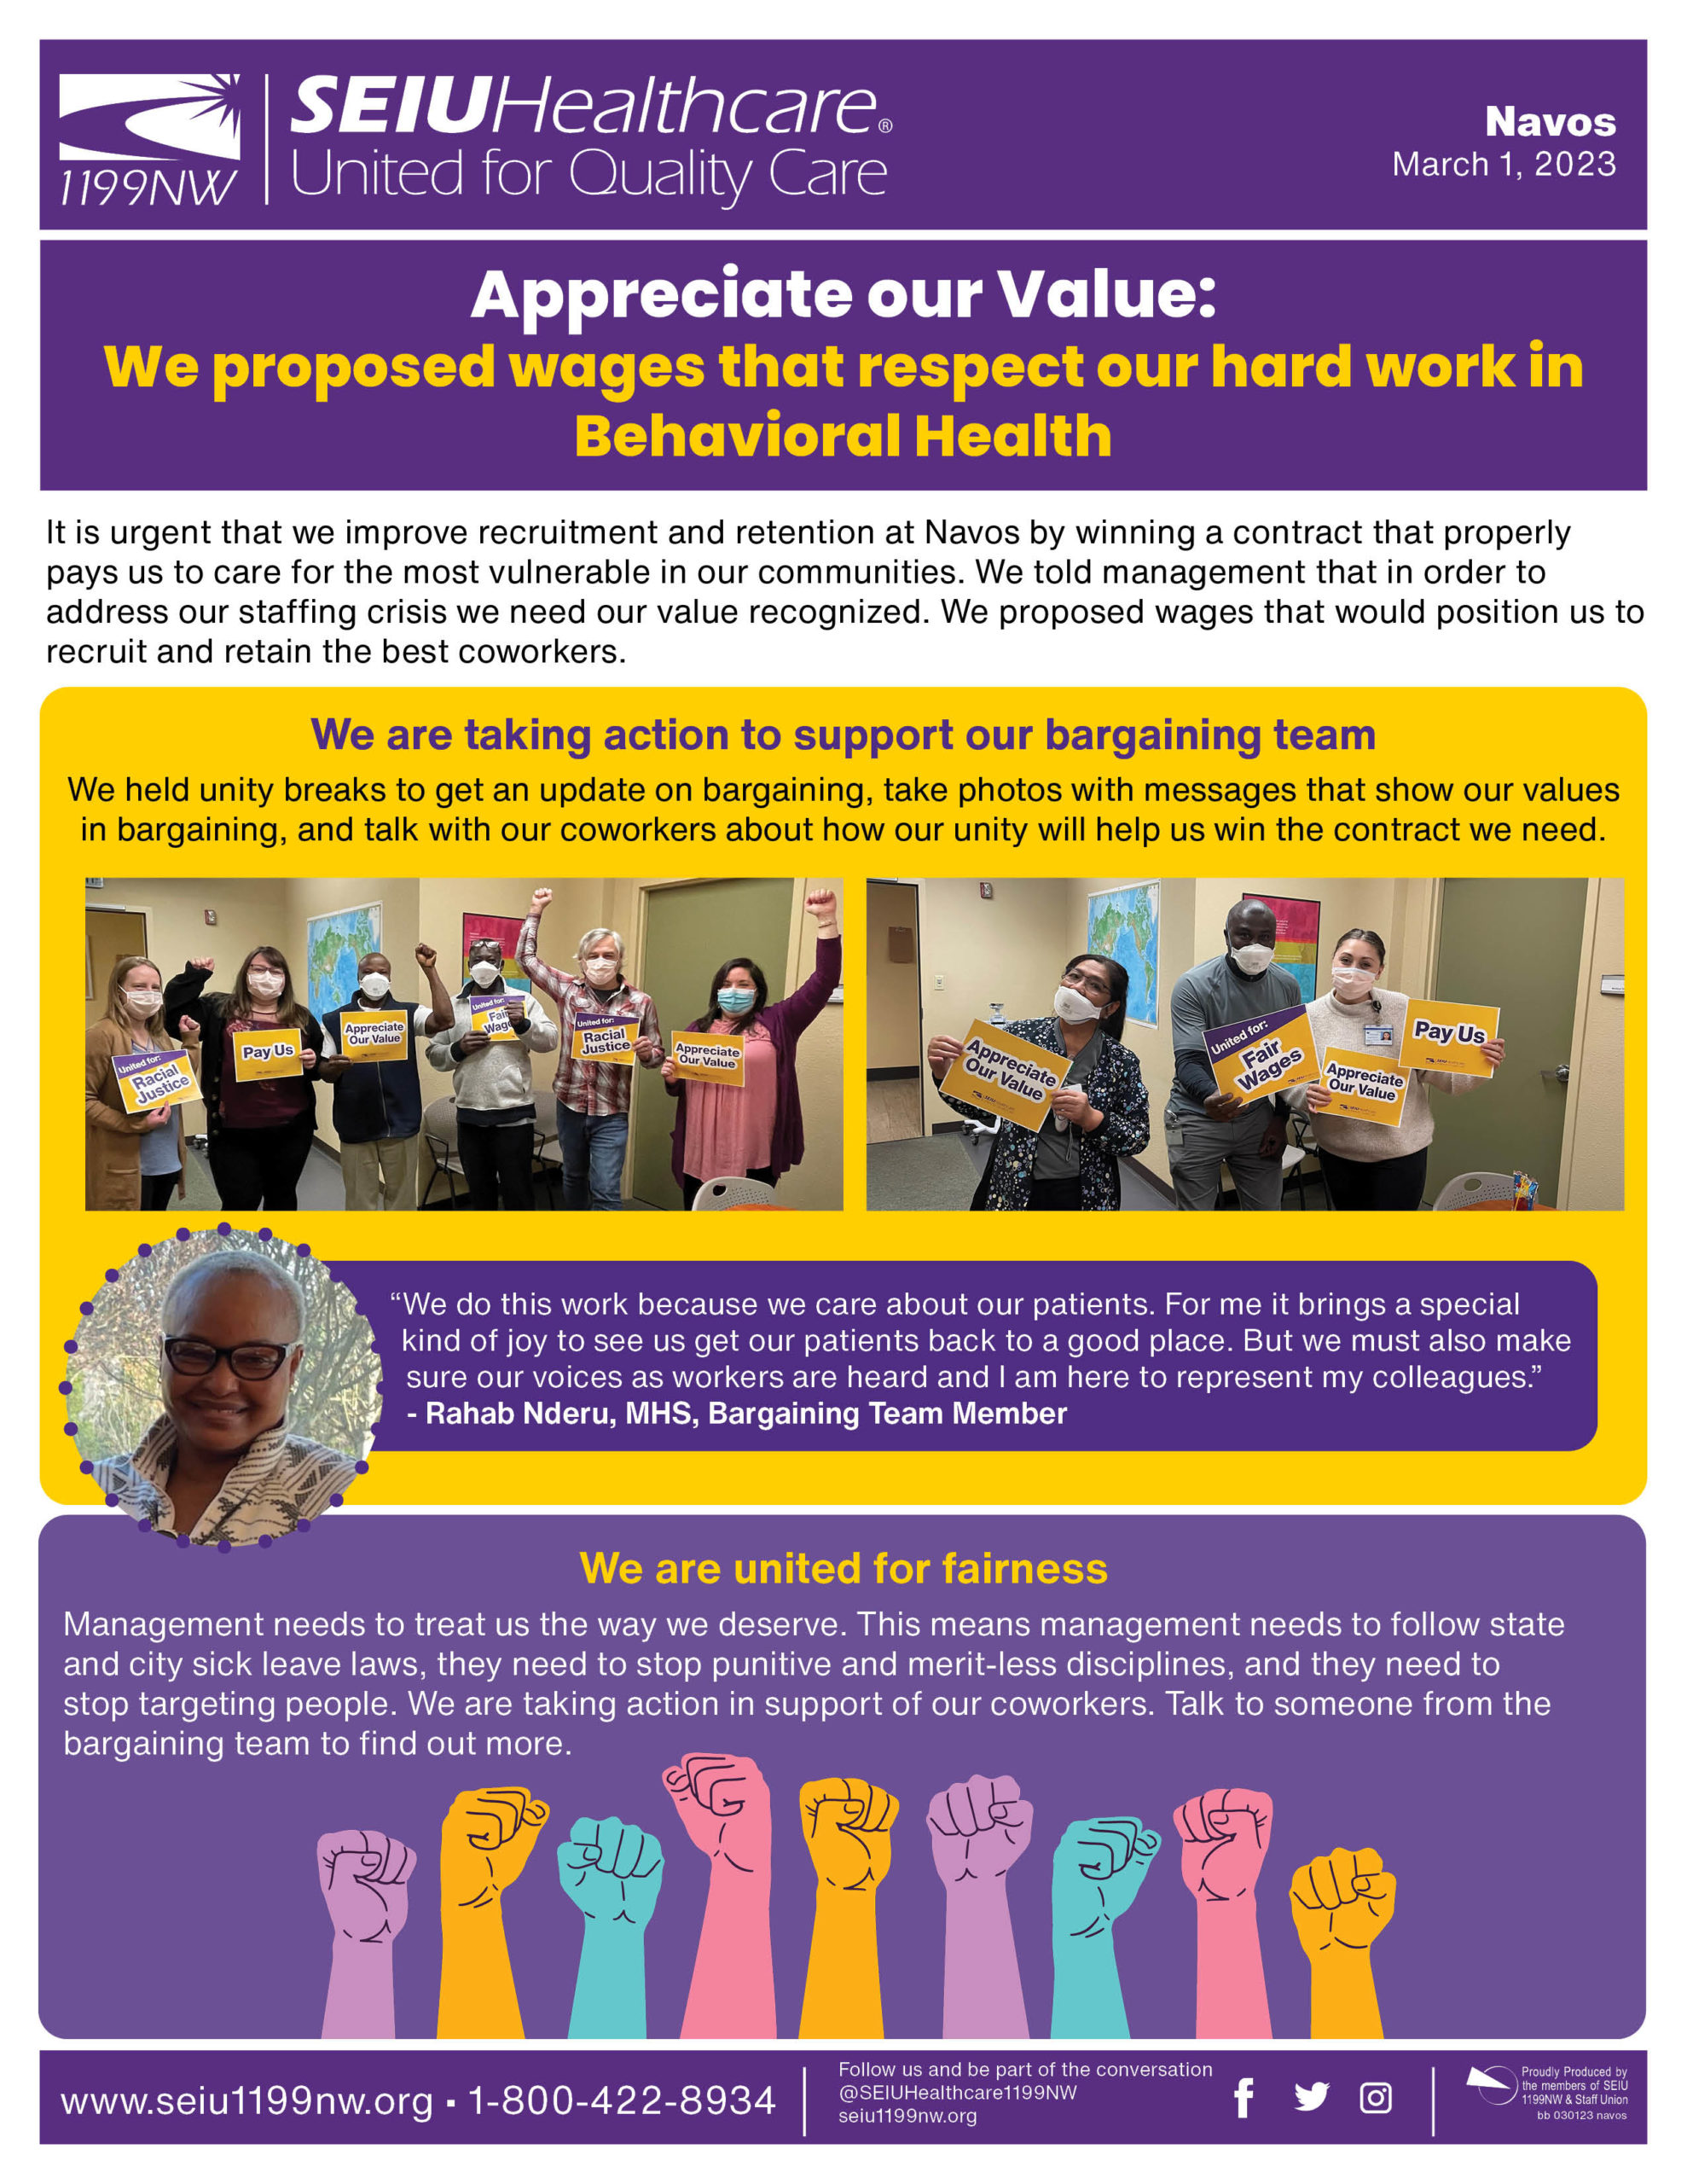 Appreciate our Value:  We proposed wages that respect our hard work in Behavioral Health